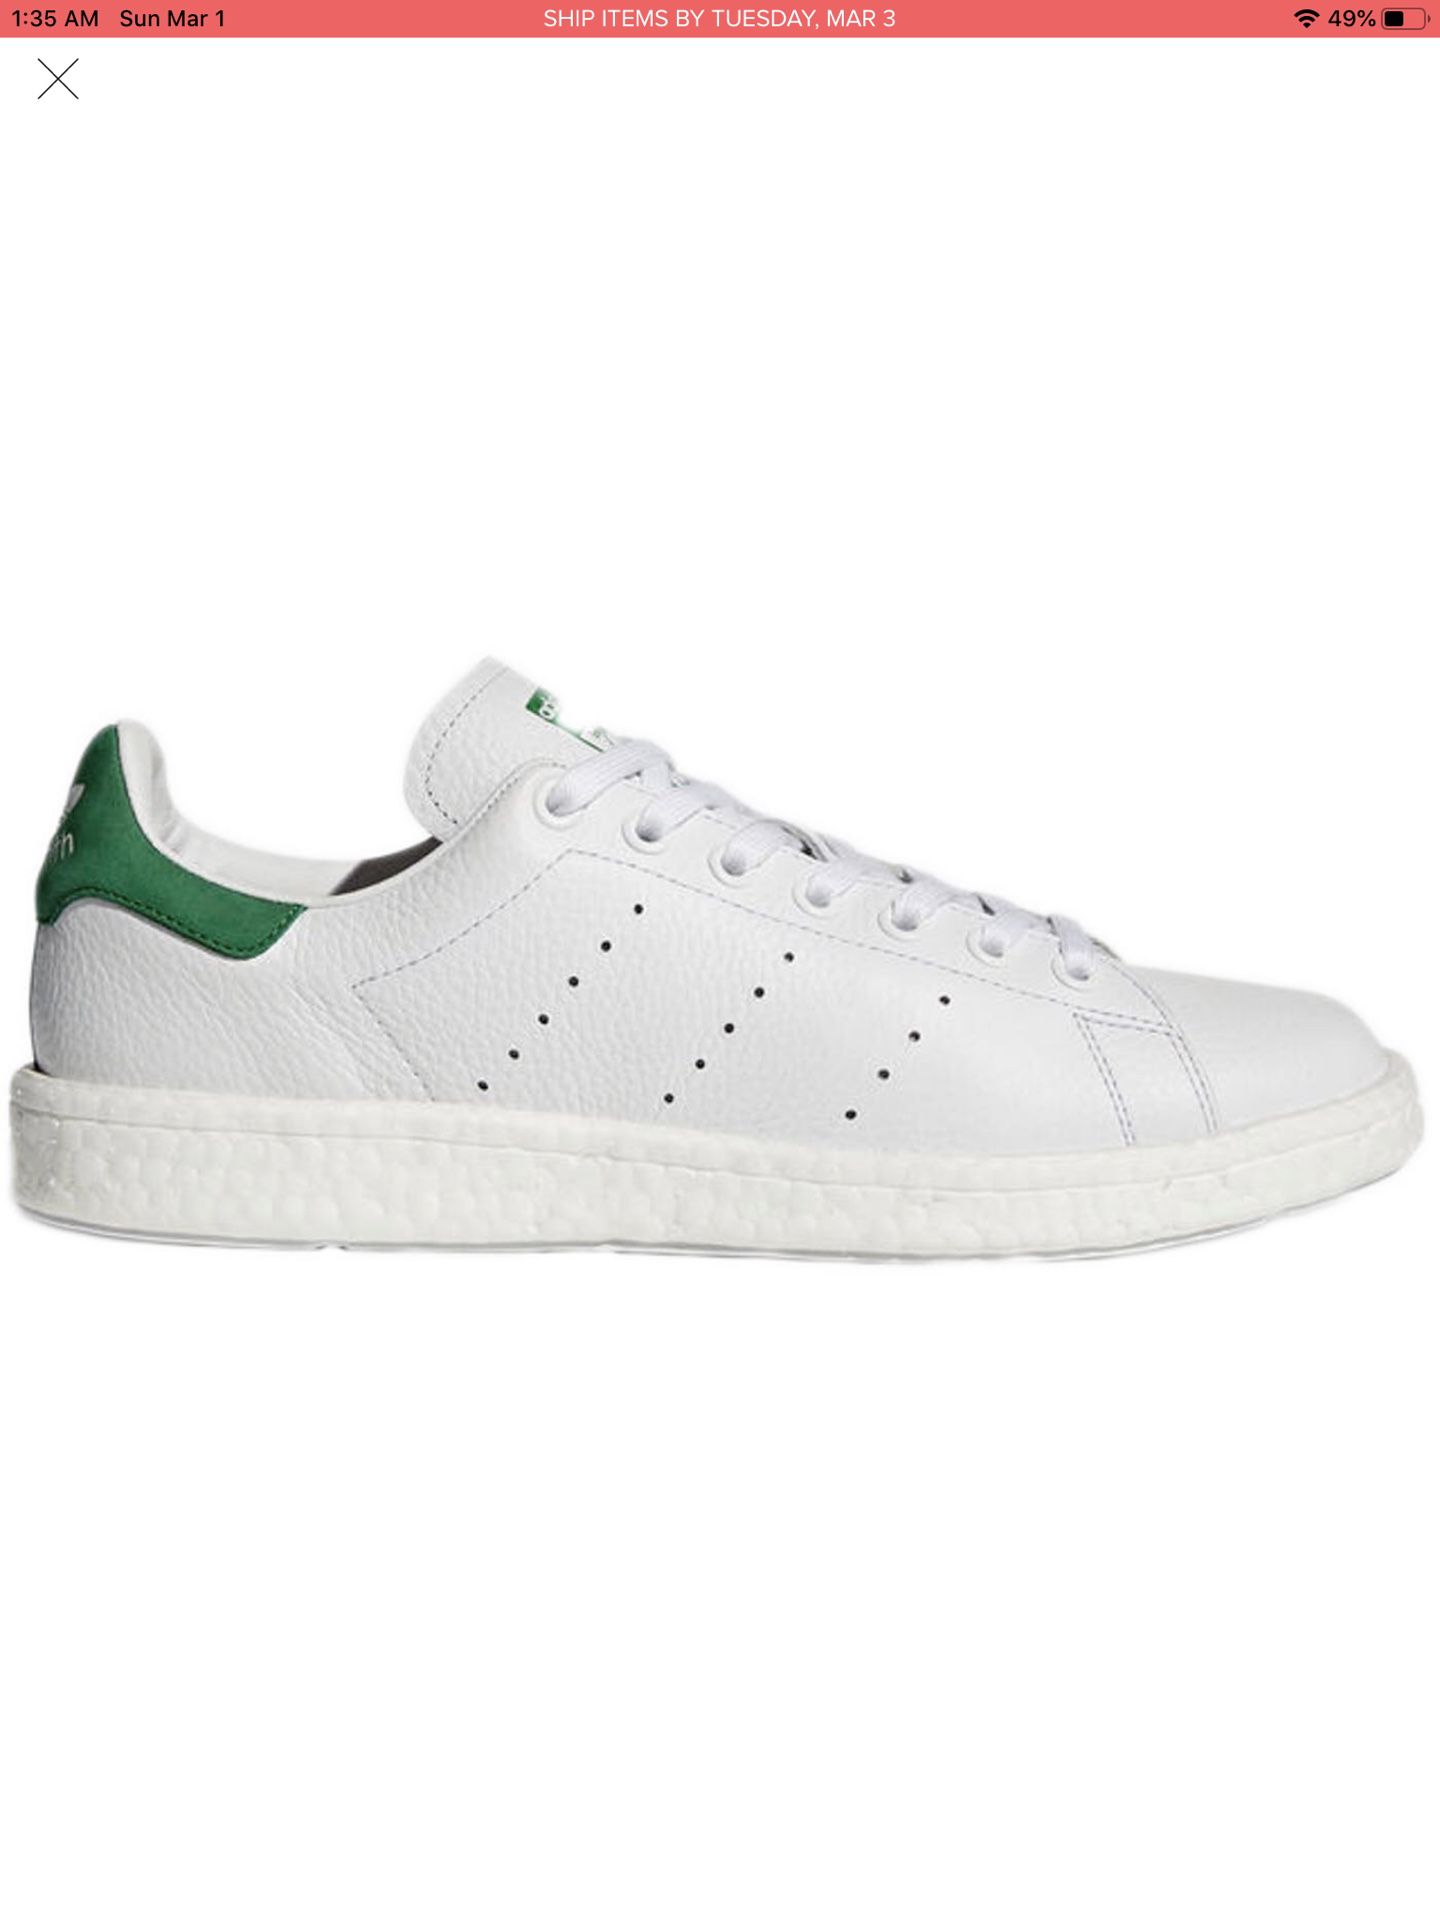 Adidas Stan Smith with Boost size 9.5